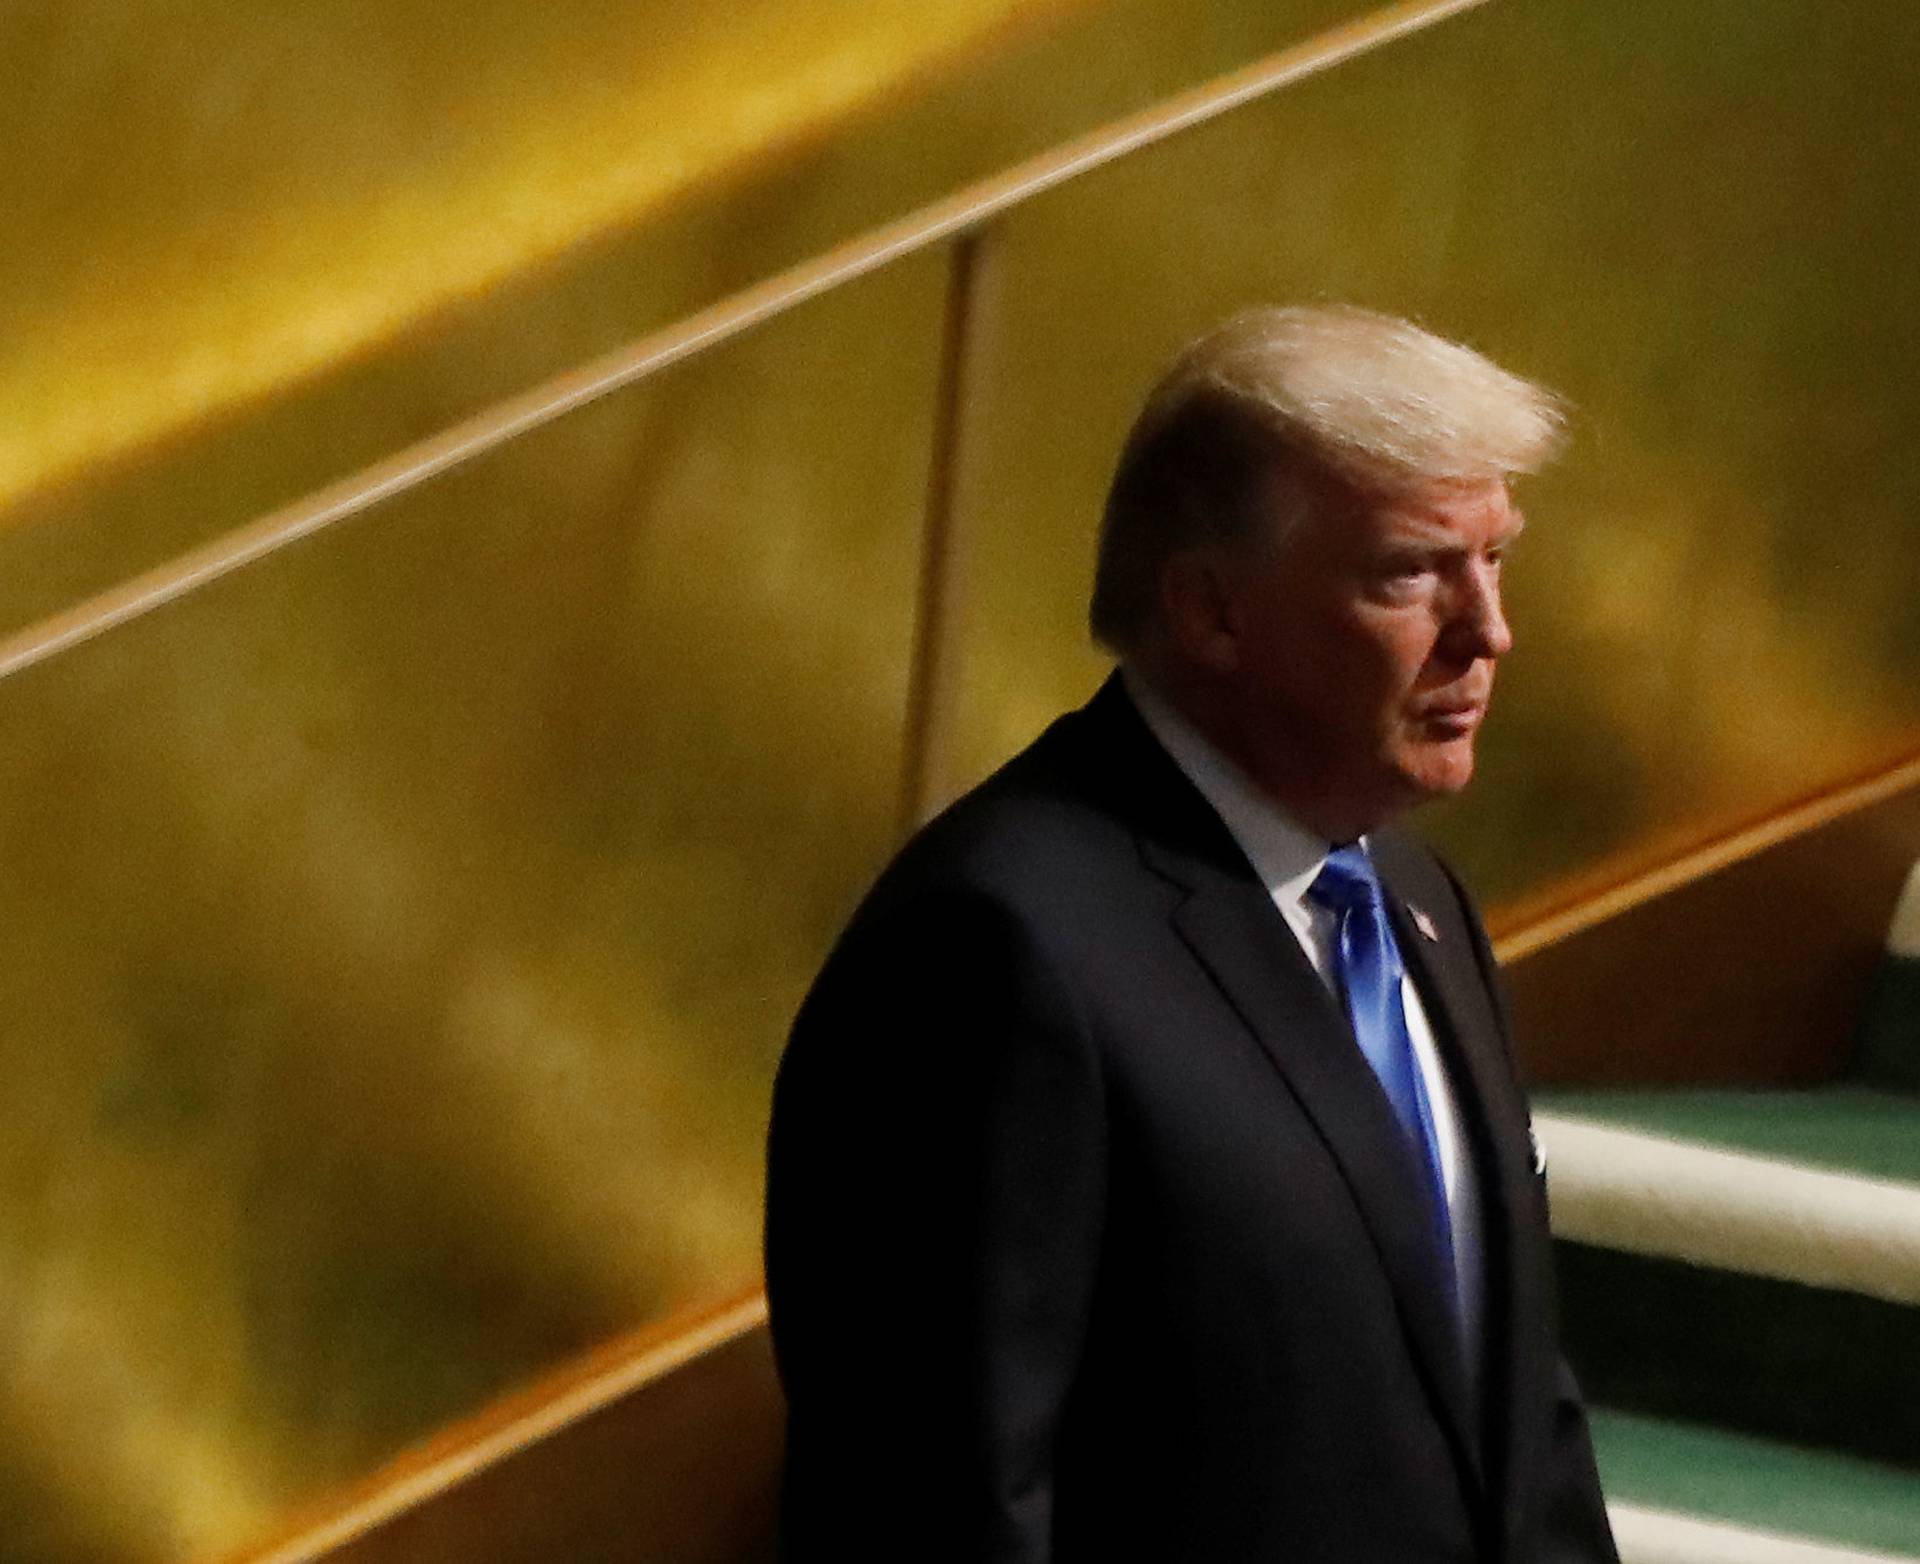 U.S. President Donald Trump arrives to address the 72nd United Nations General Assembly at U.N. headquarters in New York